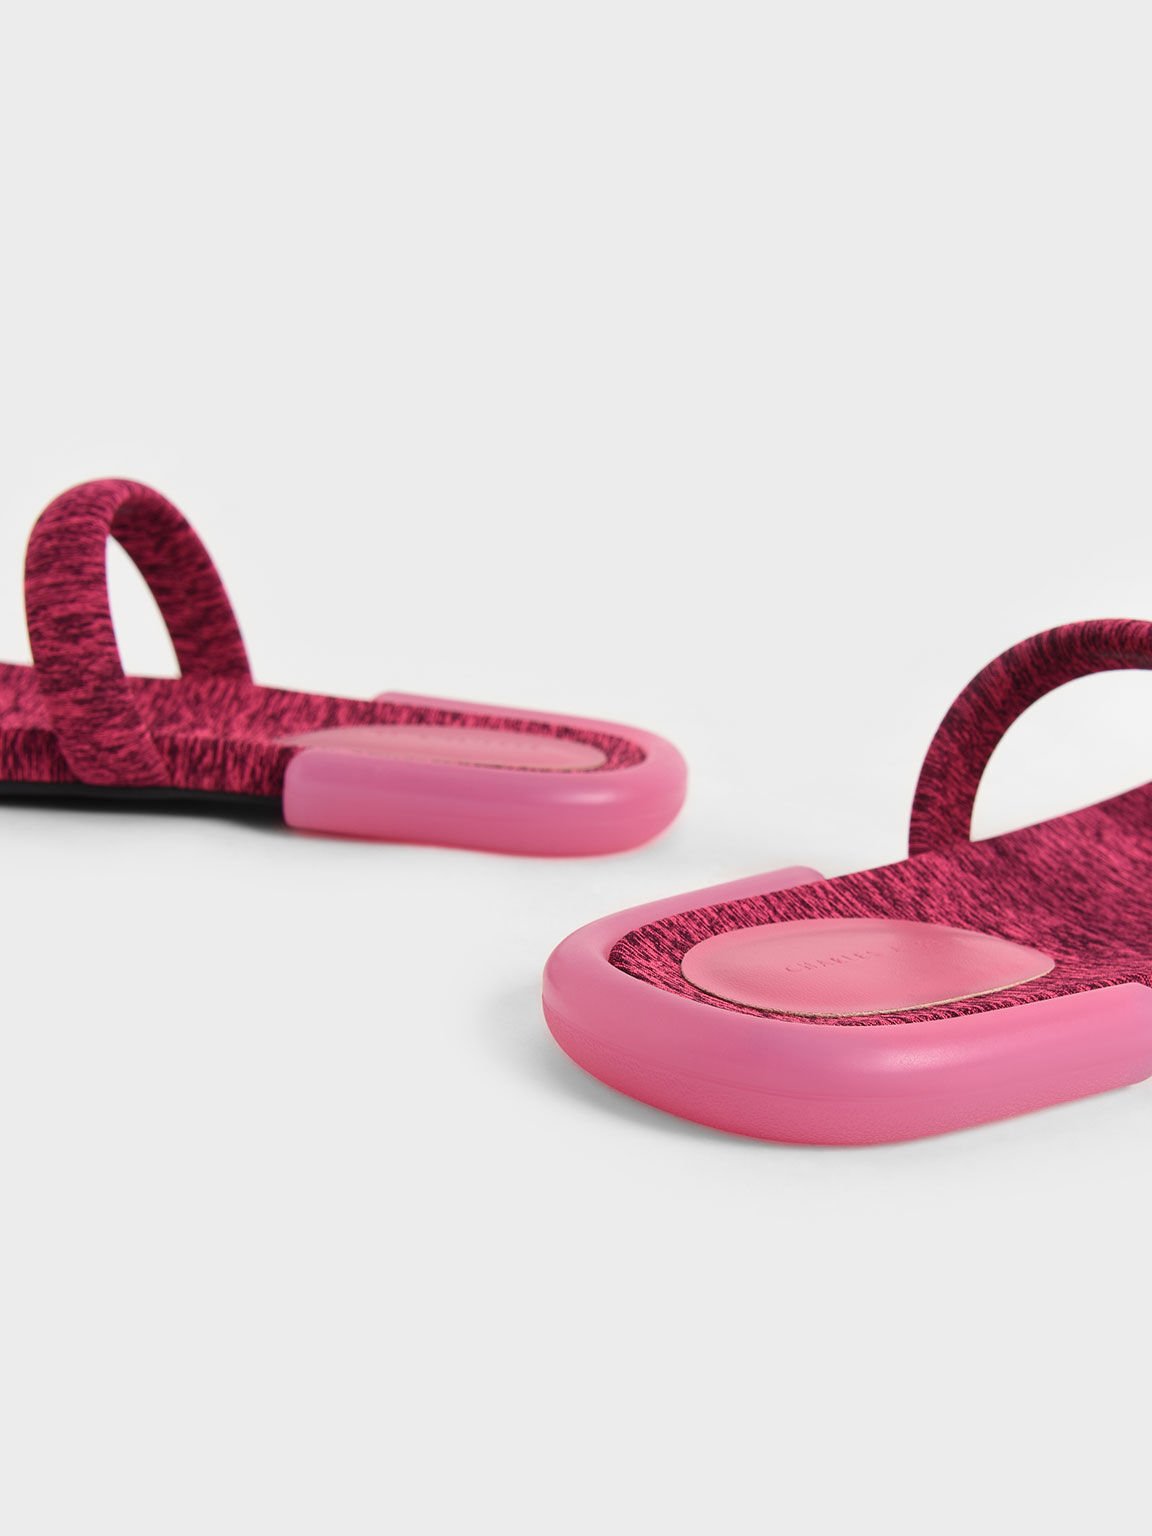 Electra Recycled Polyester Thong Sandals, Pink, hi-res